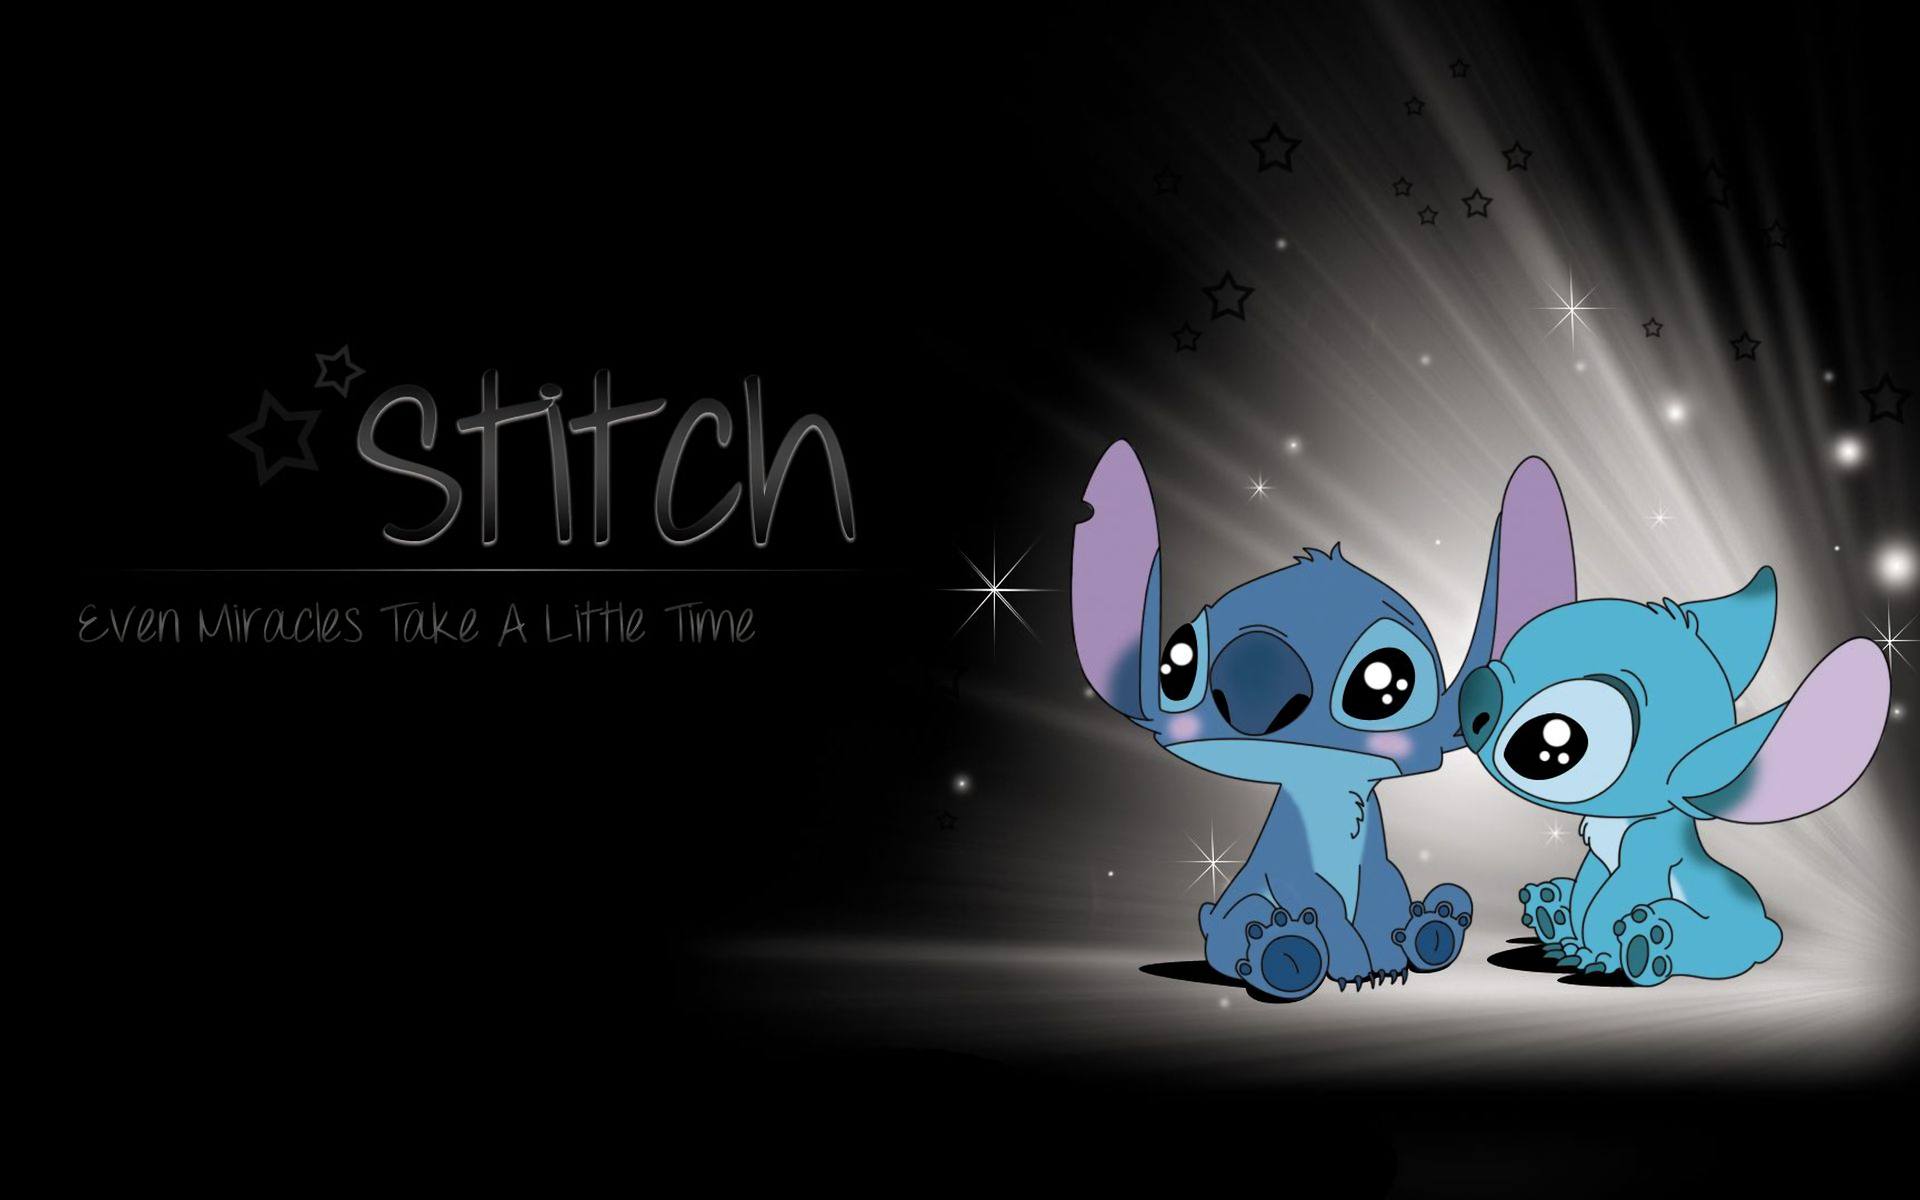 Download Stitch Wallpaper Hd Backgrounds Download Itl Cat We present you our collection of desktop wallpaper theme: stitch wallpaper hd backgrounds